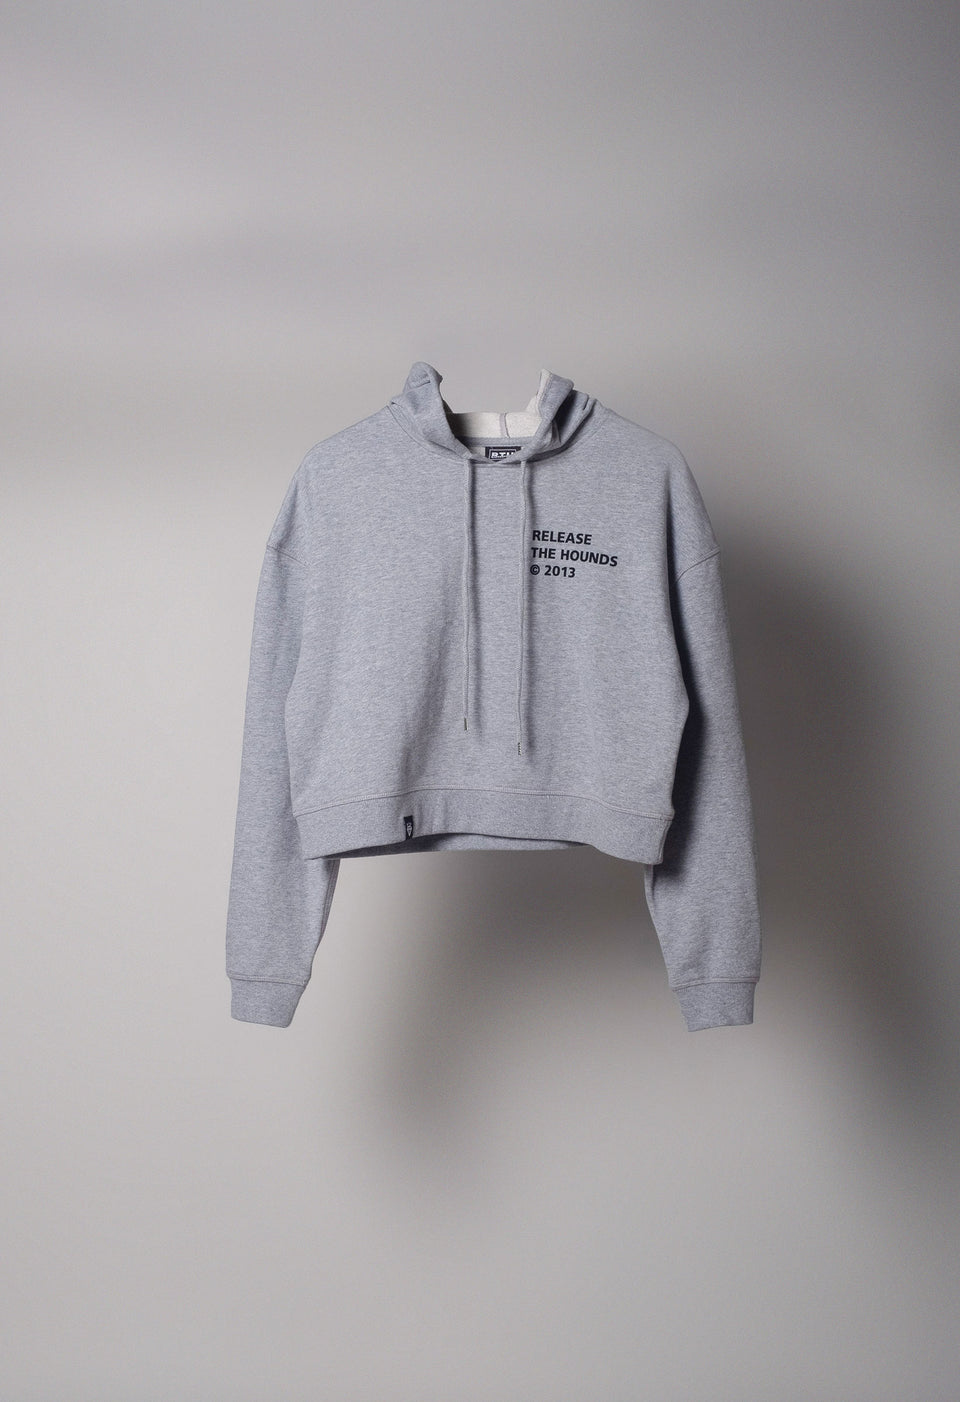 Release The Hounds 'Copyright' Crop Hoodie - Grey